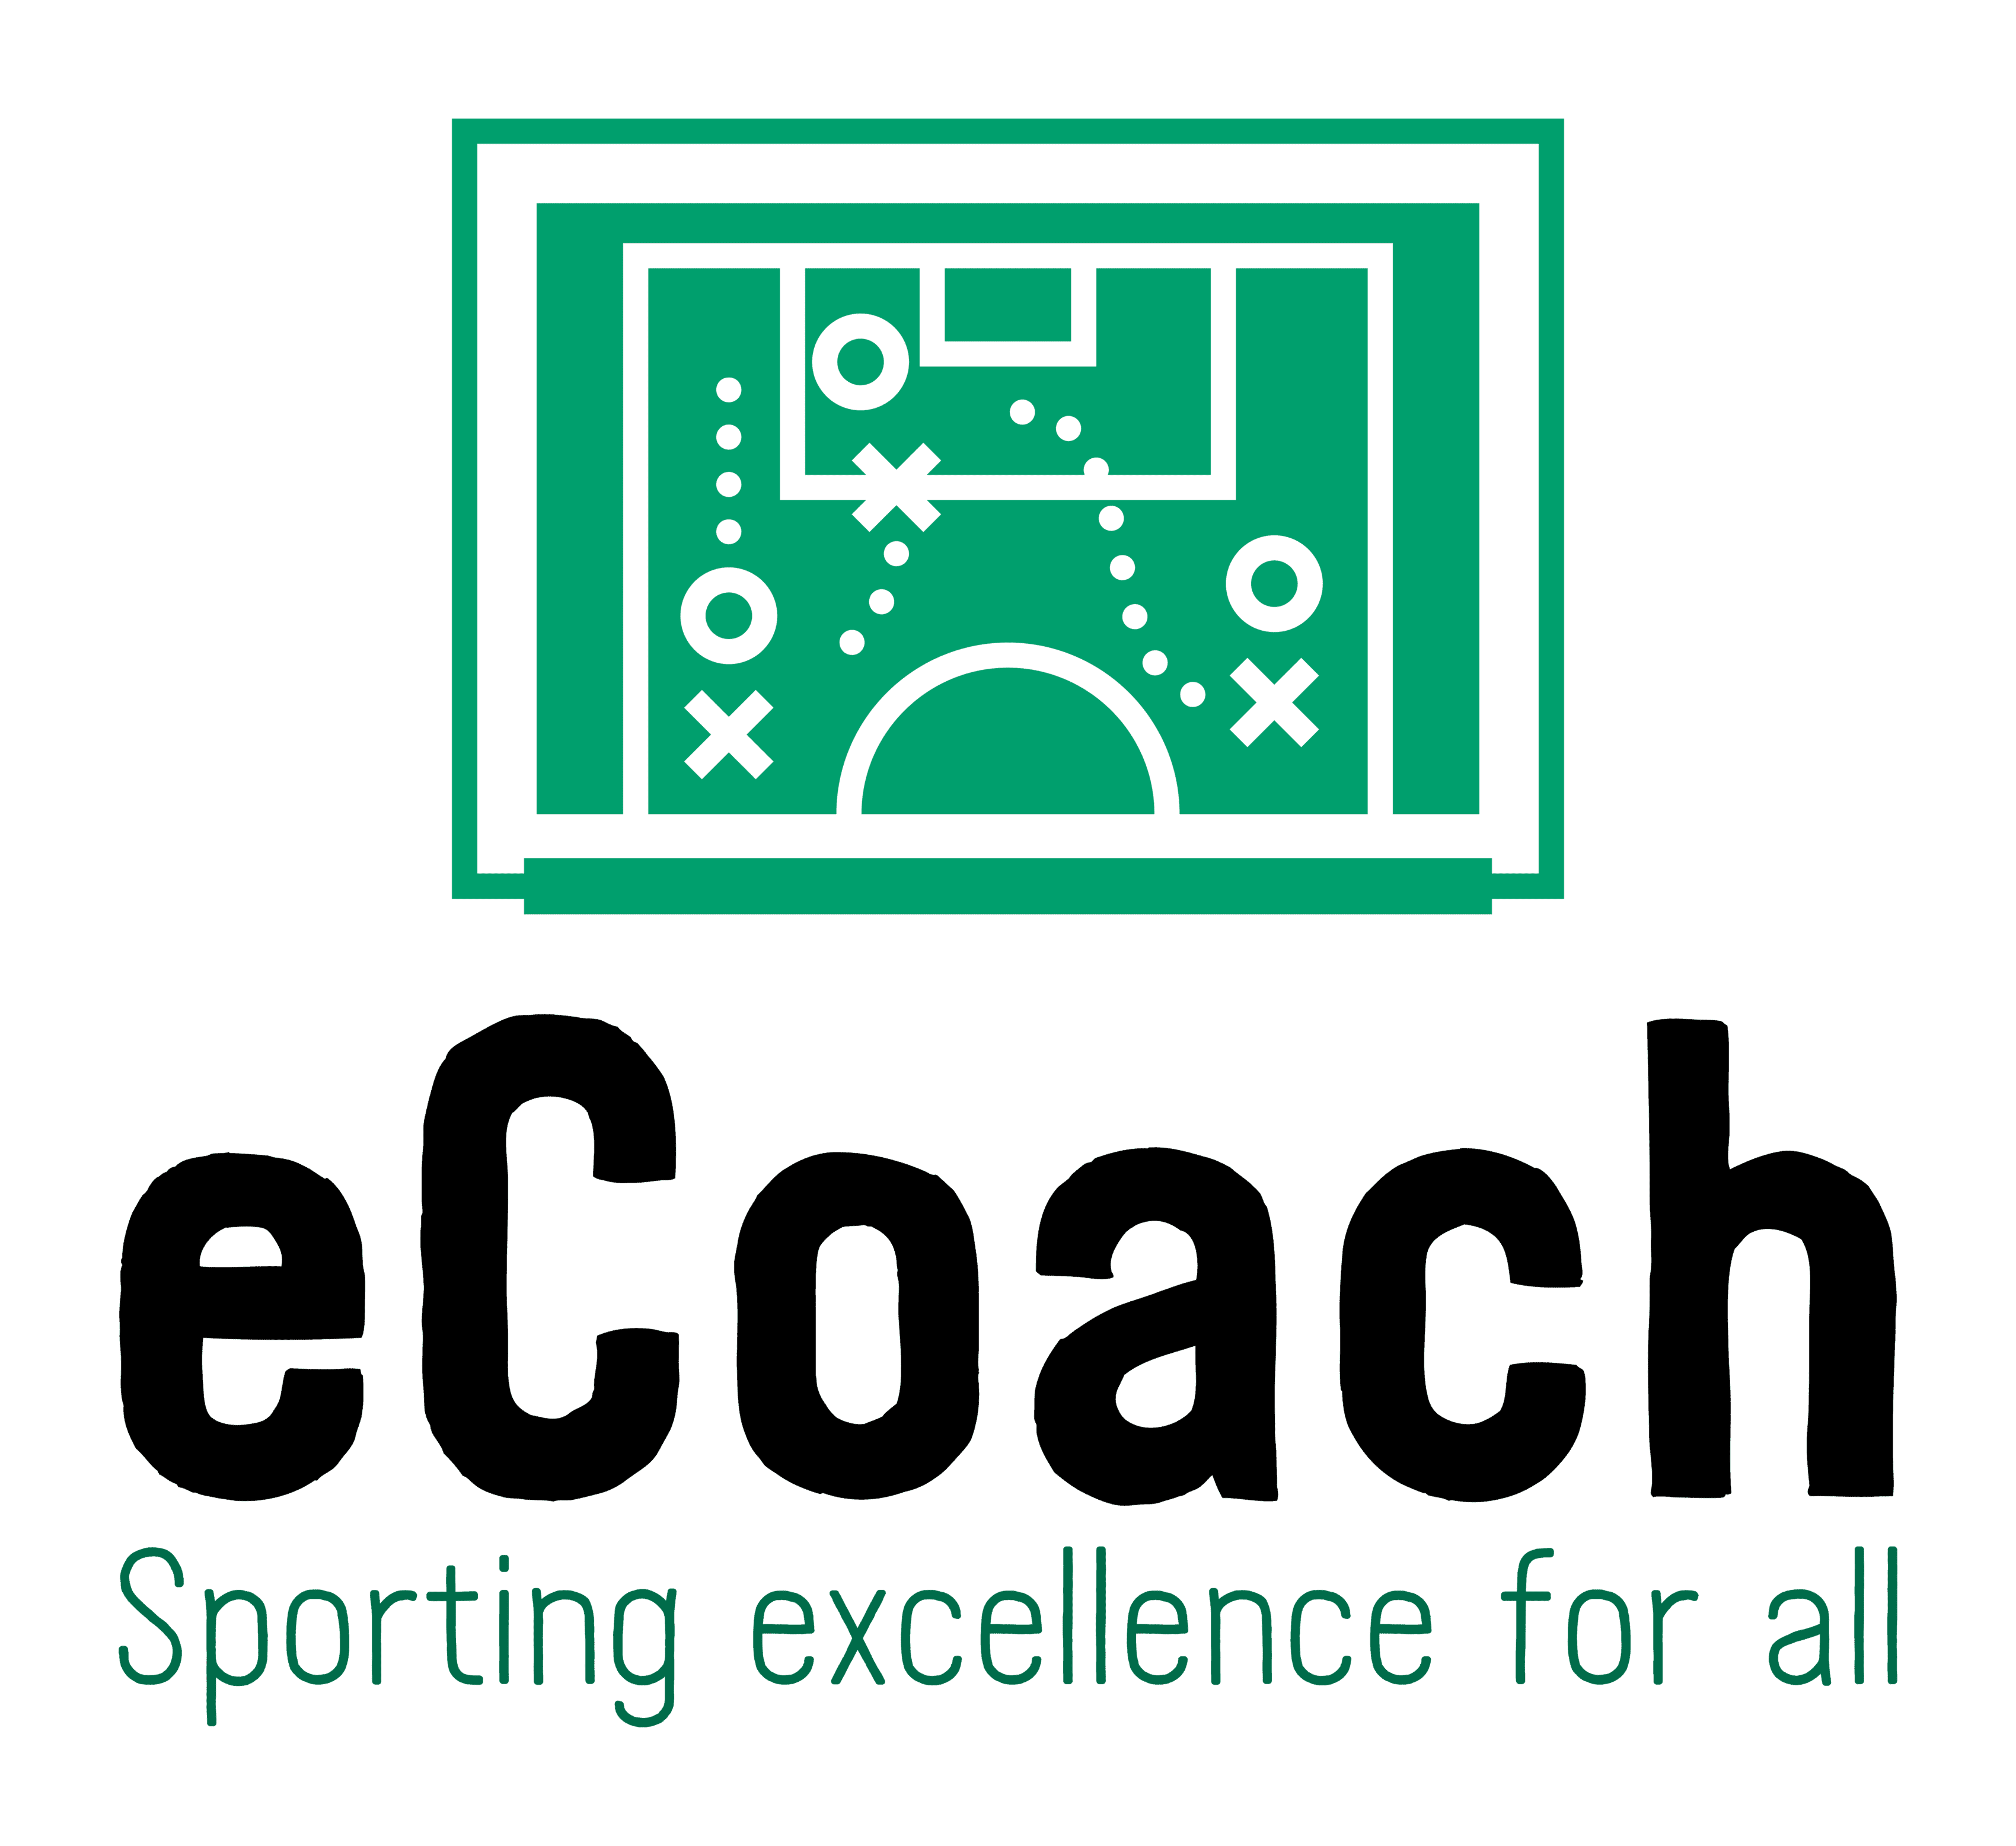 Learn with eCoach